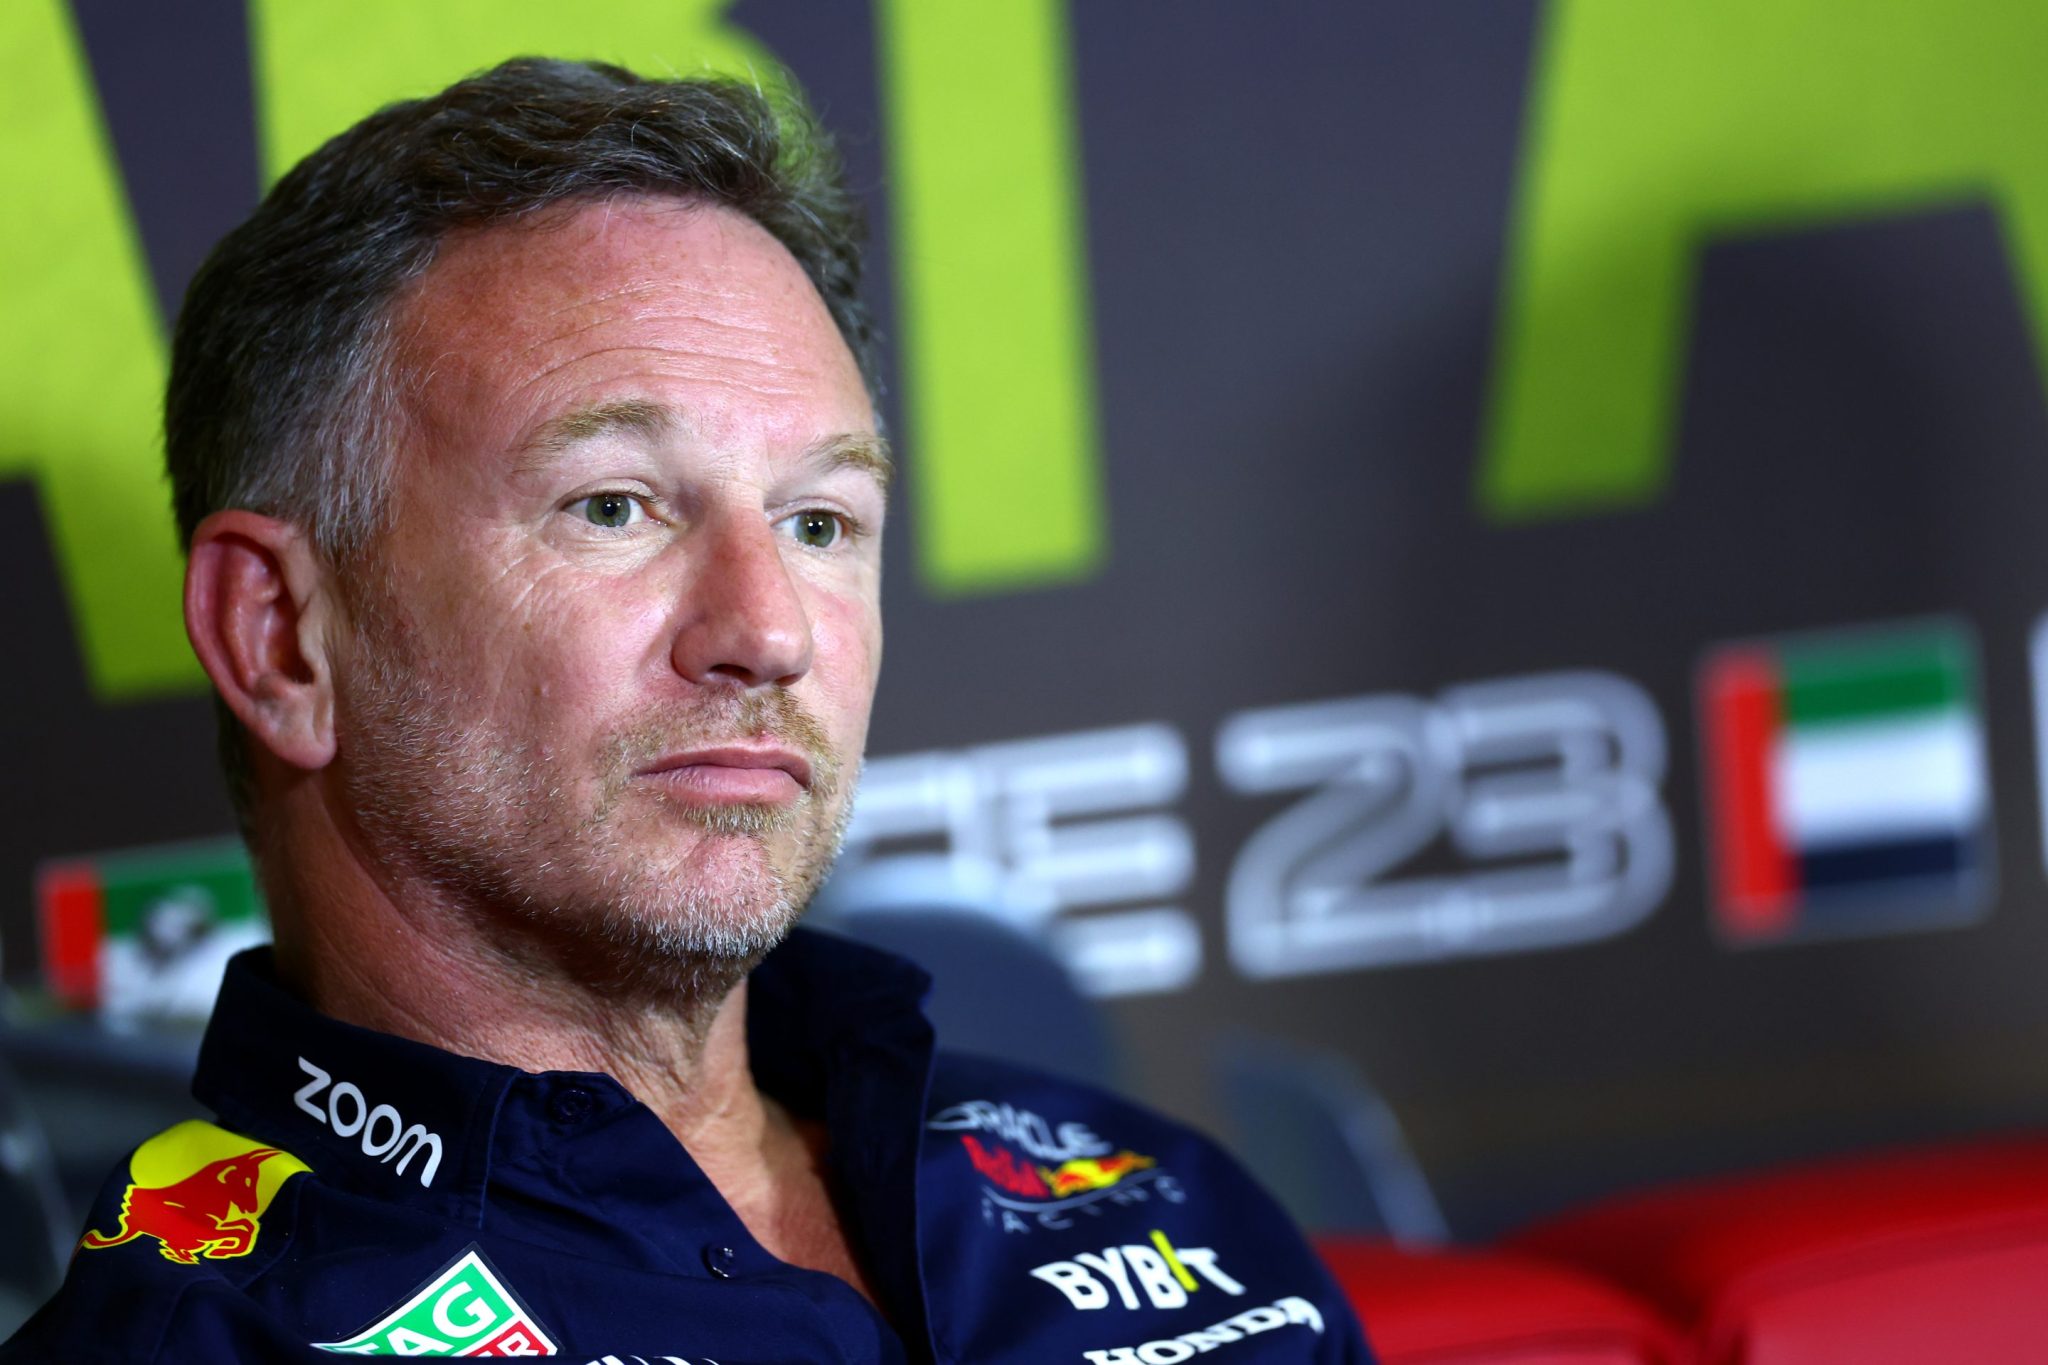 Christian Horner under investigation for alleged ‘inappropriate behavior’ at Red Bull